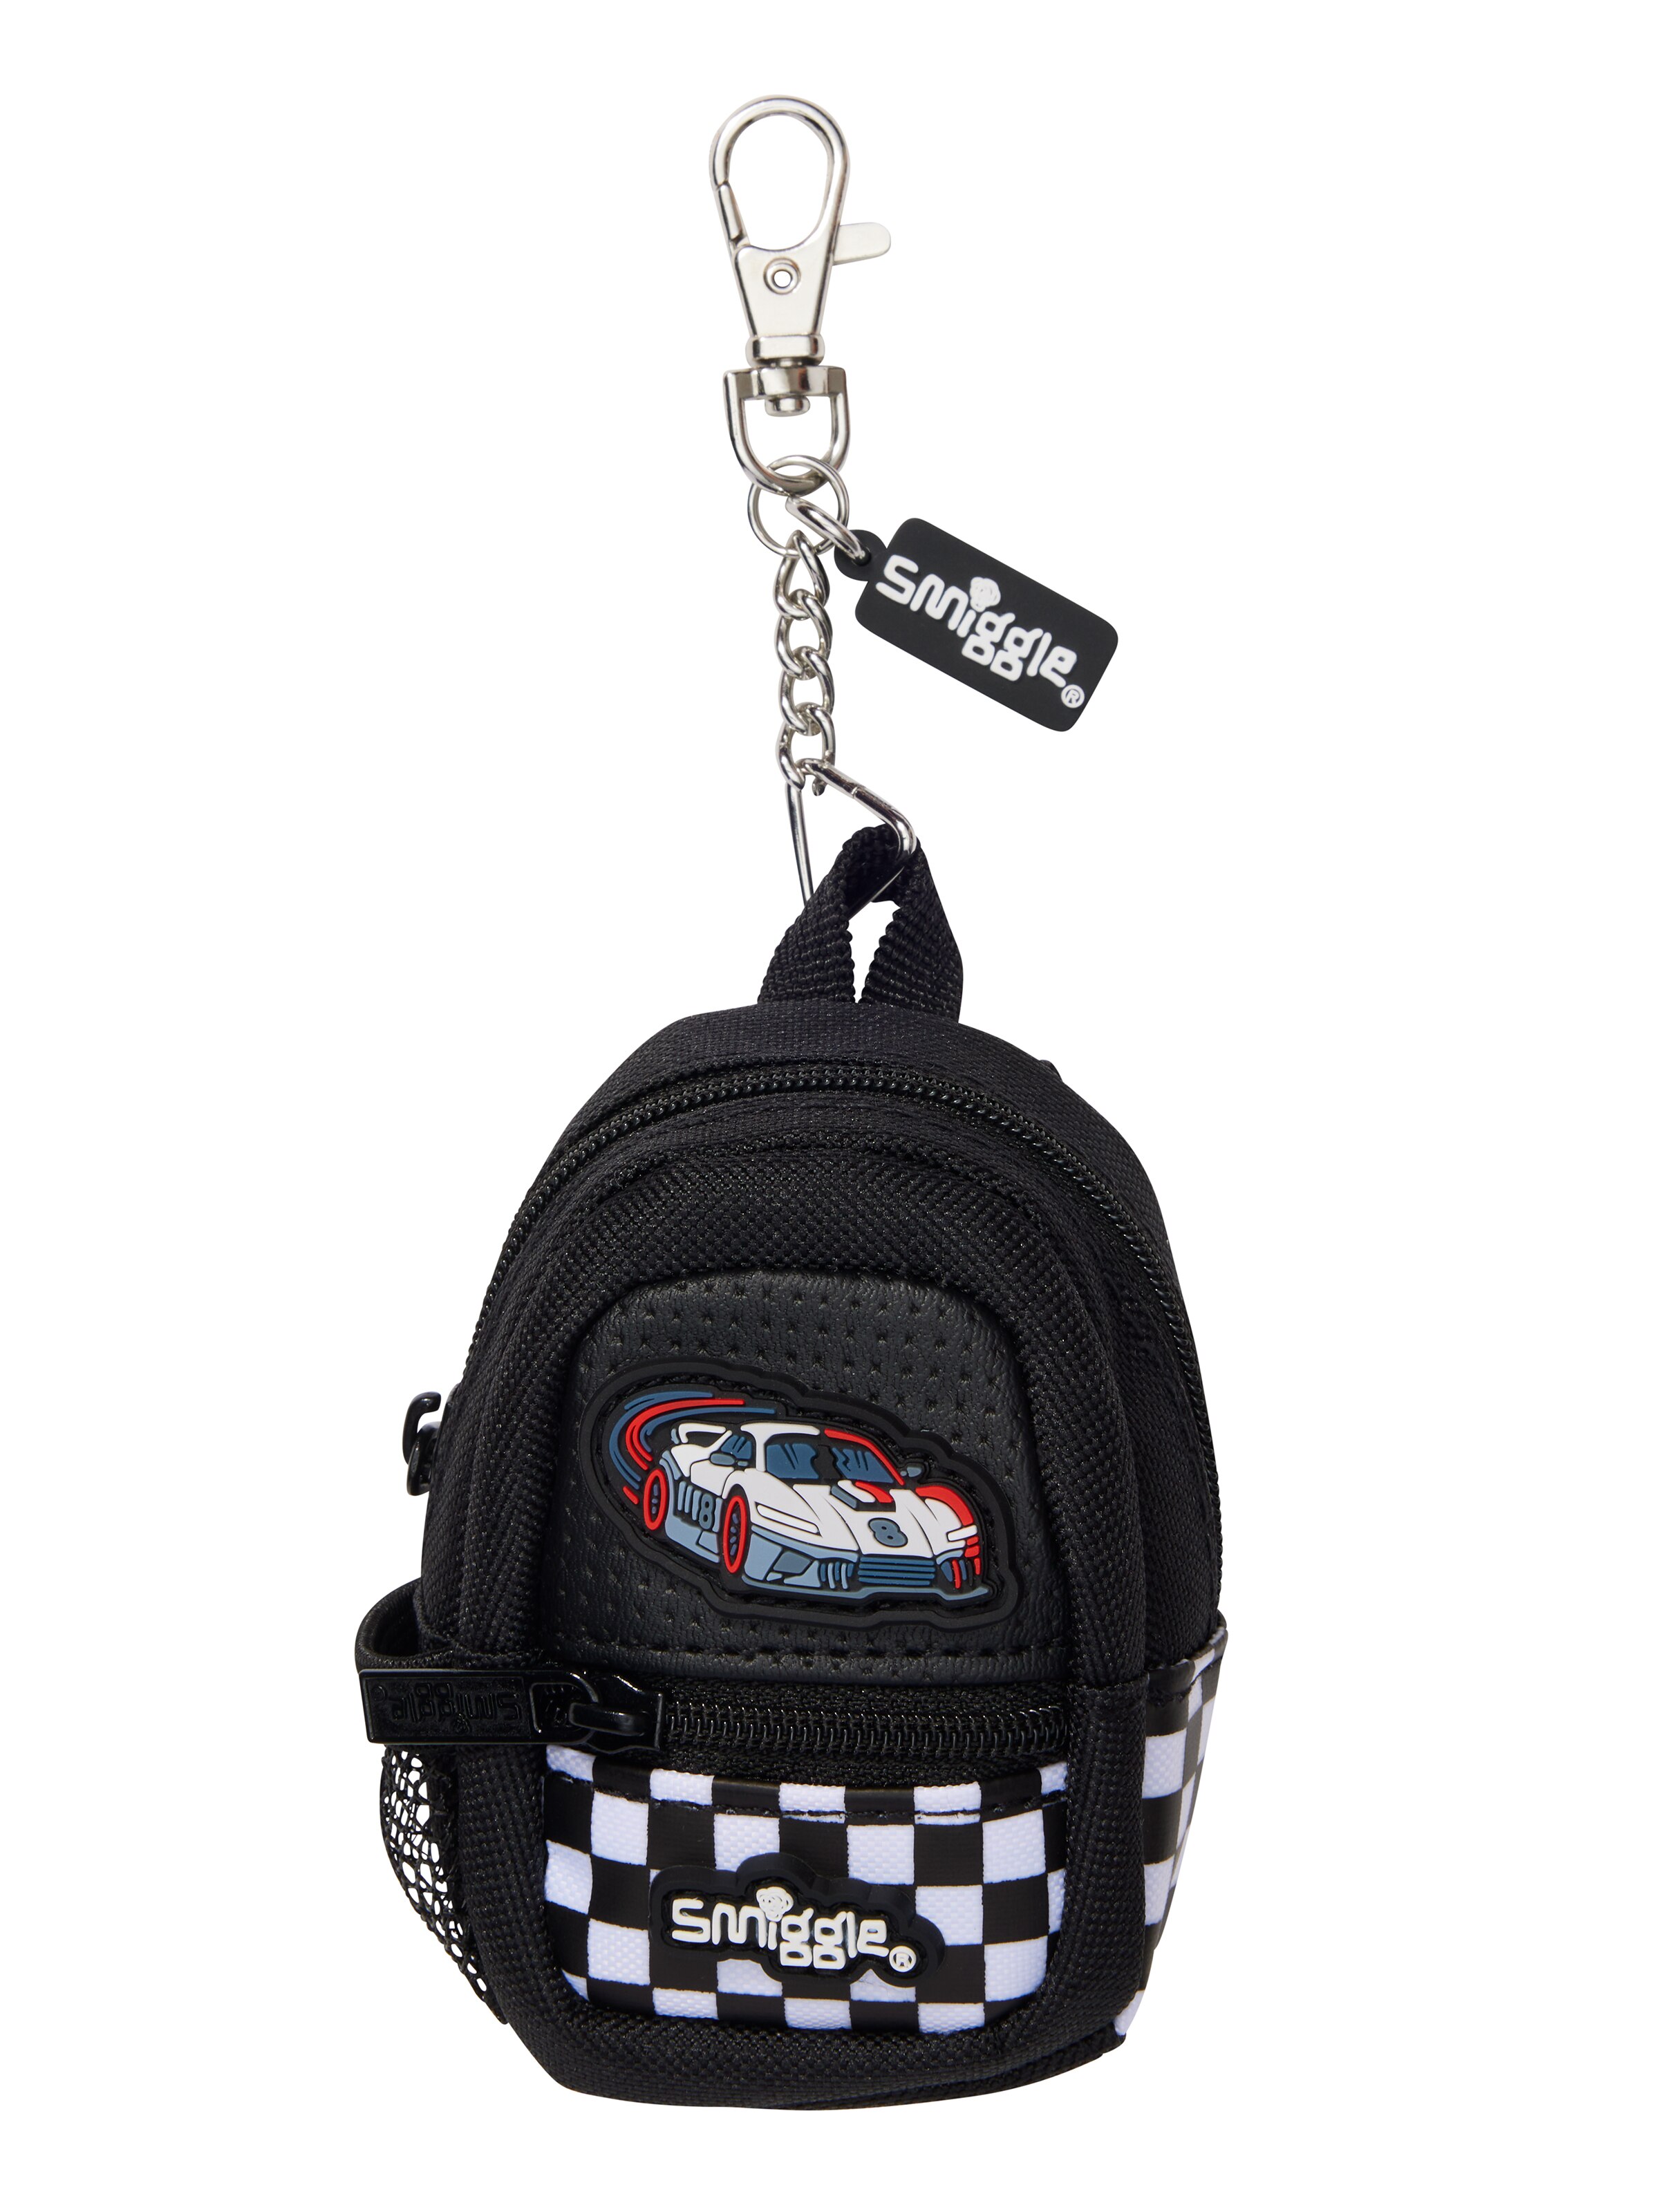 Limitless Mini Backpack Collectable Keyring